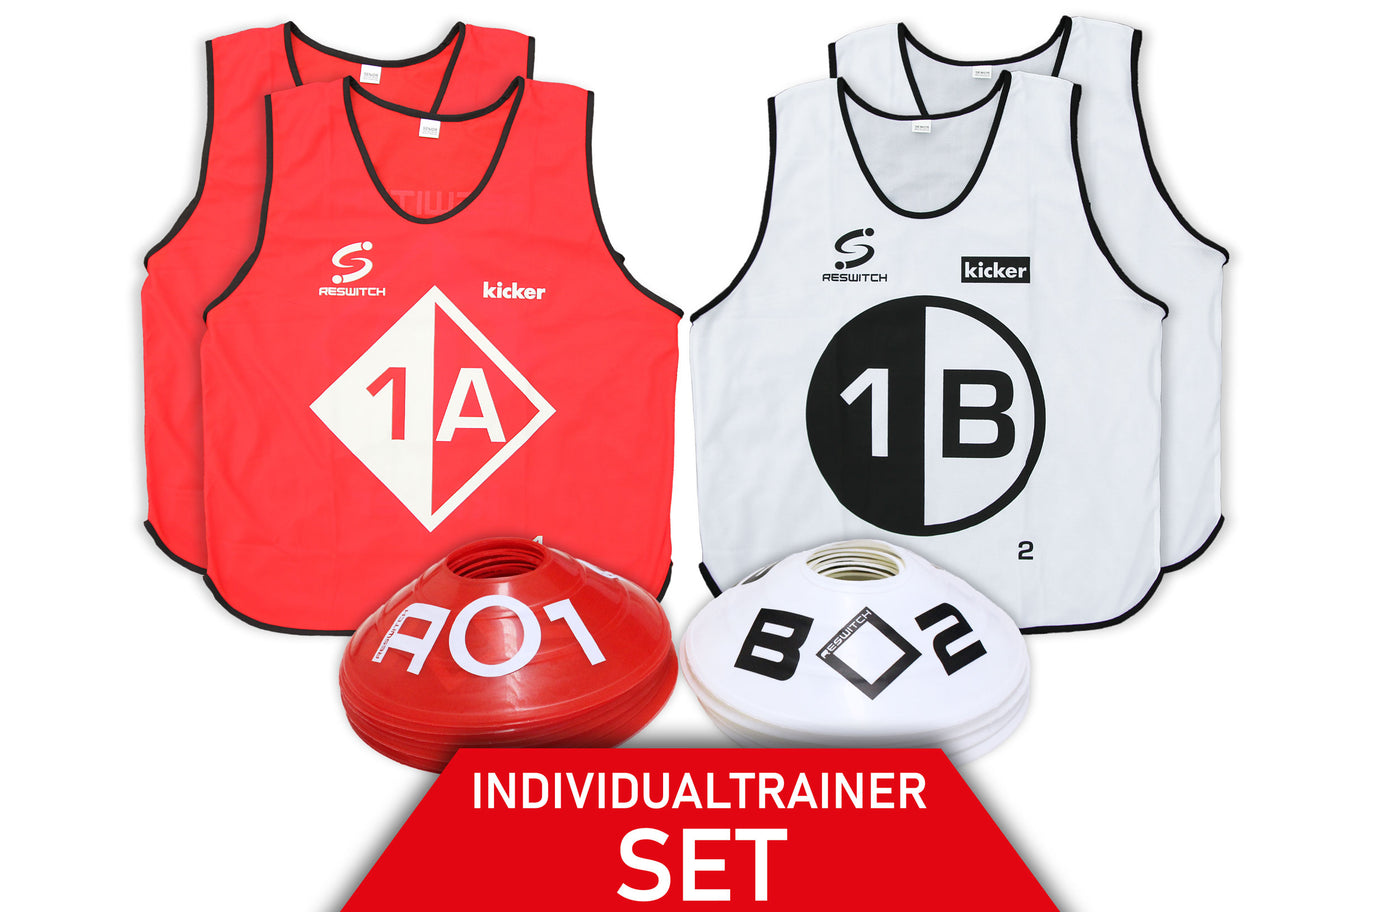 RESWITCH individual trainer set